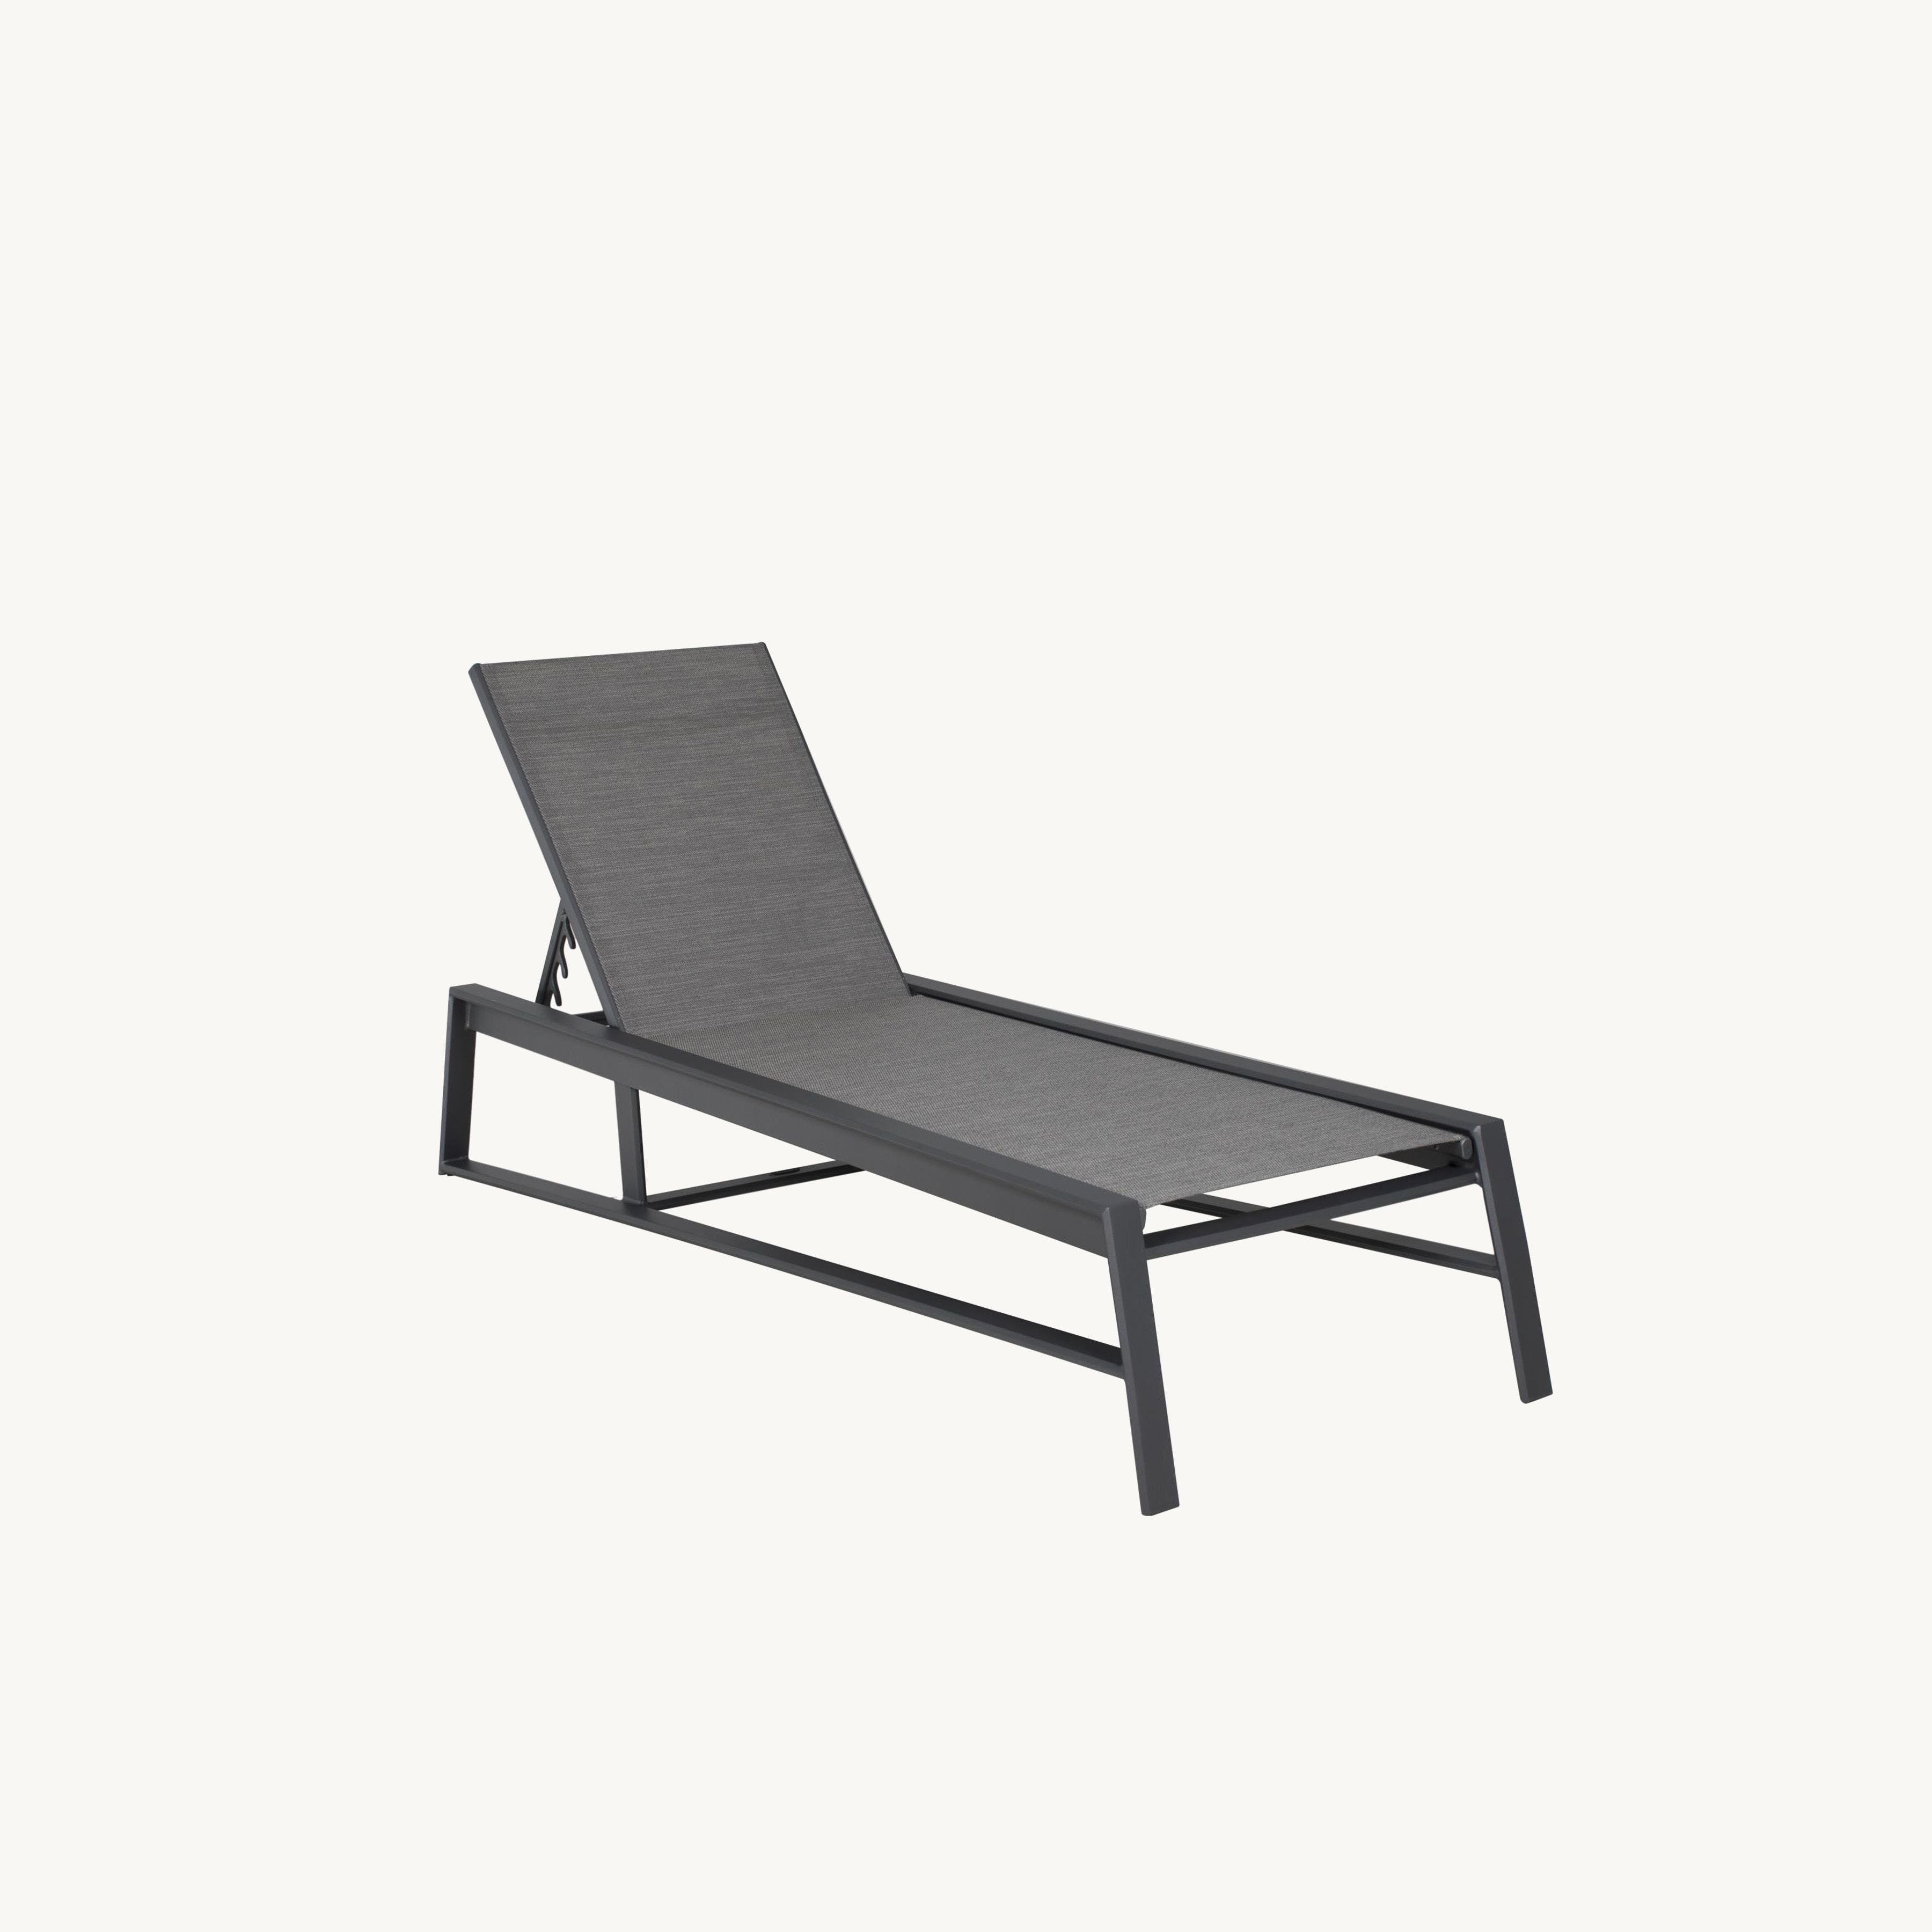 Prism Adjustable Sling Chaise Lounge By Castelle